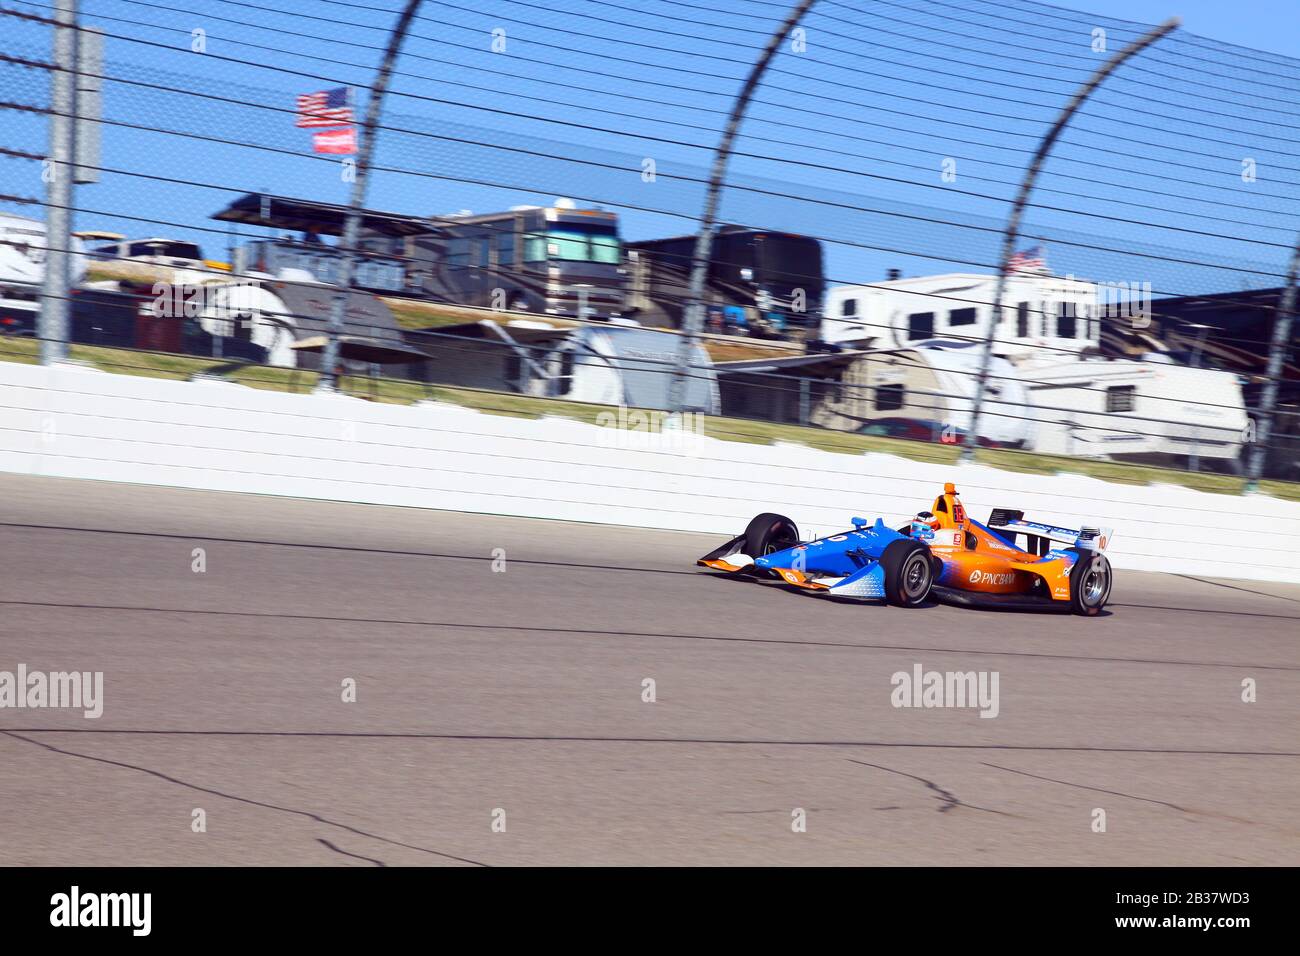 Newton Iowa, July 19, 2019:  Felix Rosenqvist, Sweden, on race track during practice session for the Iowa 300 Indycar race. Stock Photo